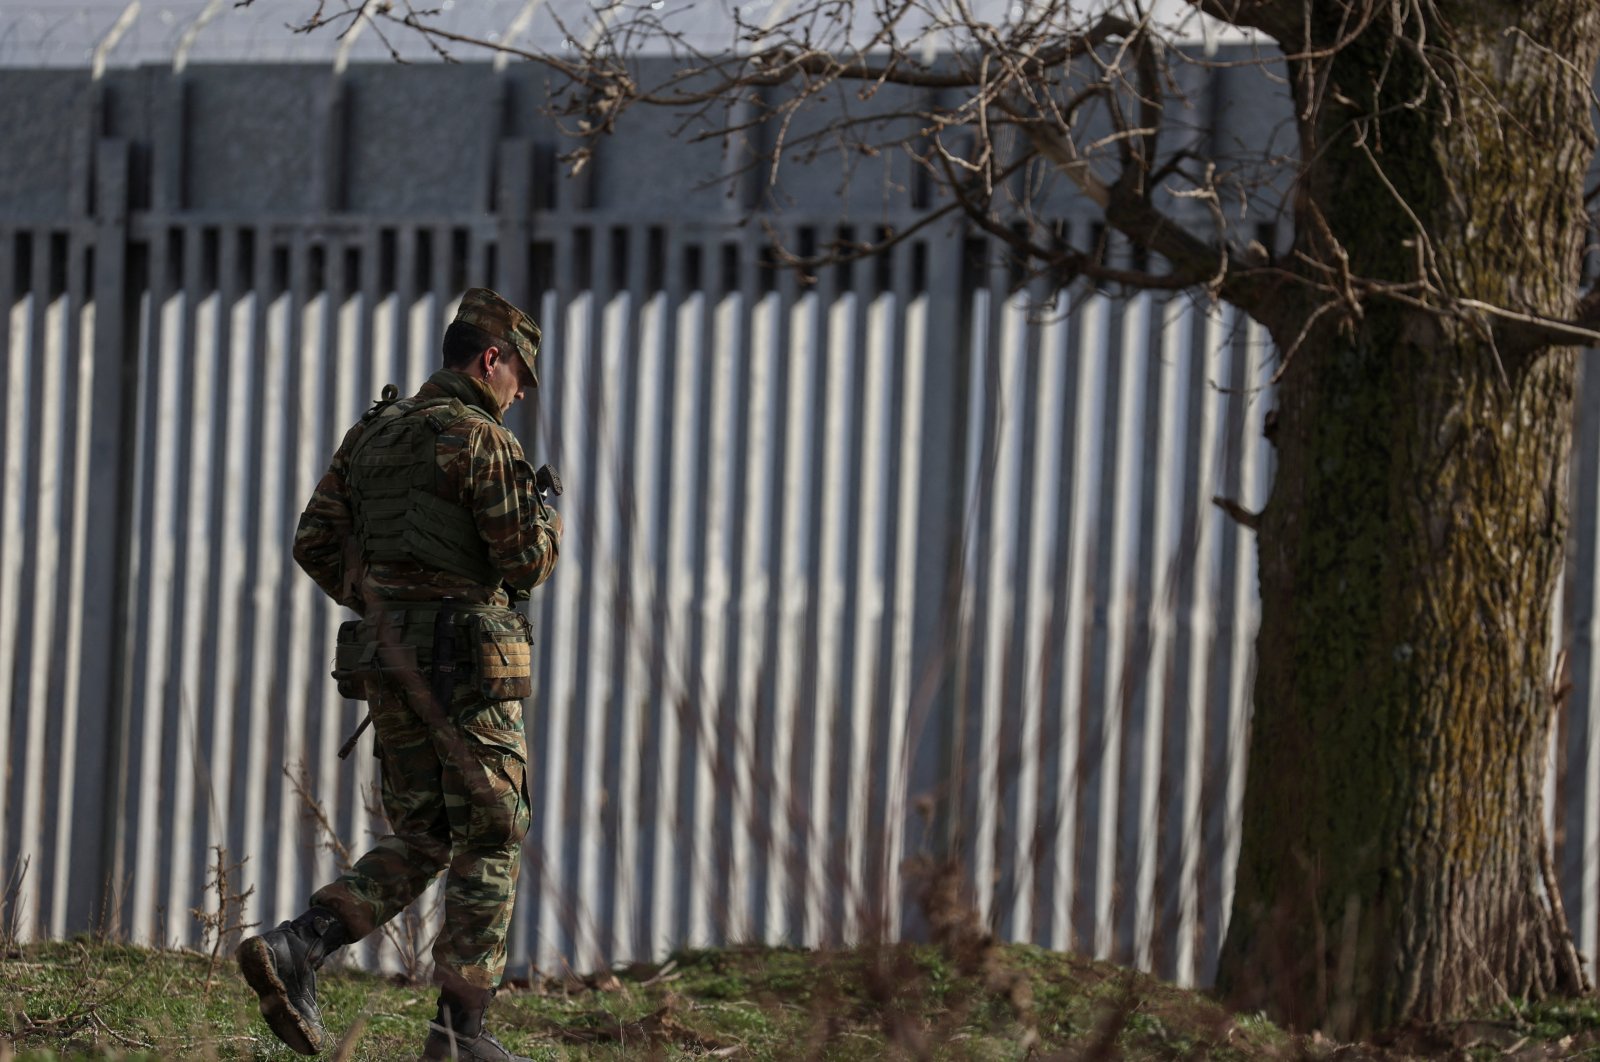 A Greek Army officer walks next to a border fence, built to prevent migrant crossings, during a press tour at the Greek-Turkish border, near the village of Poros, Evros region, Greece, Jan. 21, 2023. (REUTERS Photo)